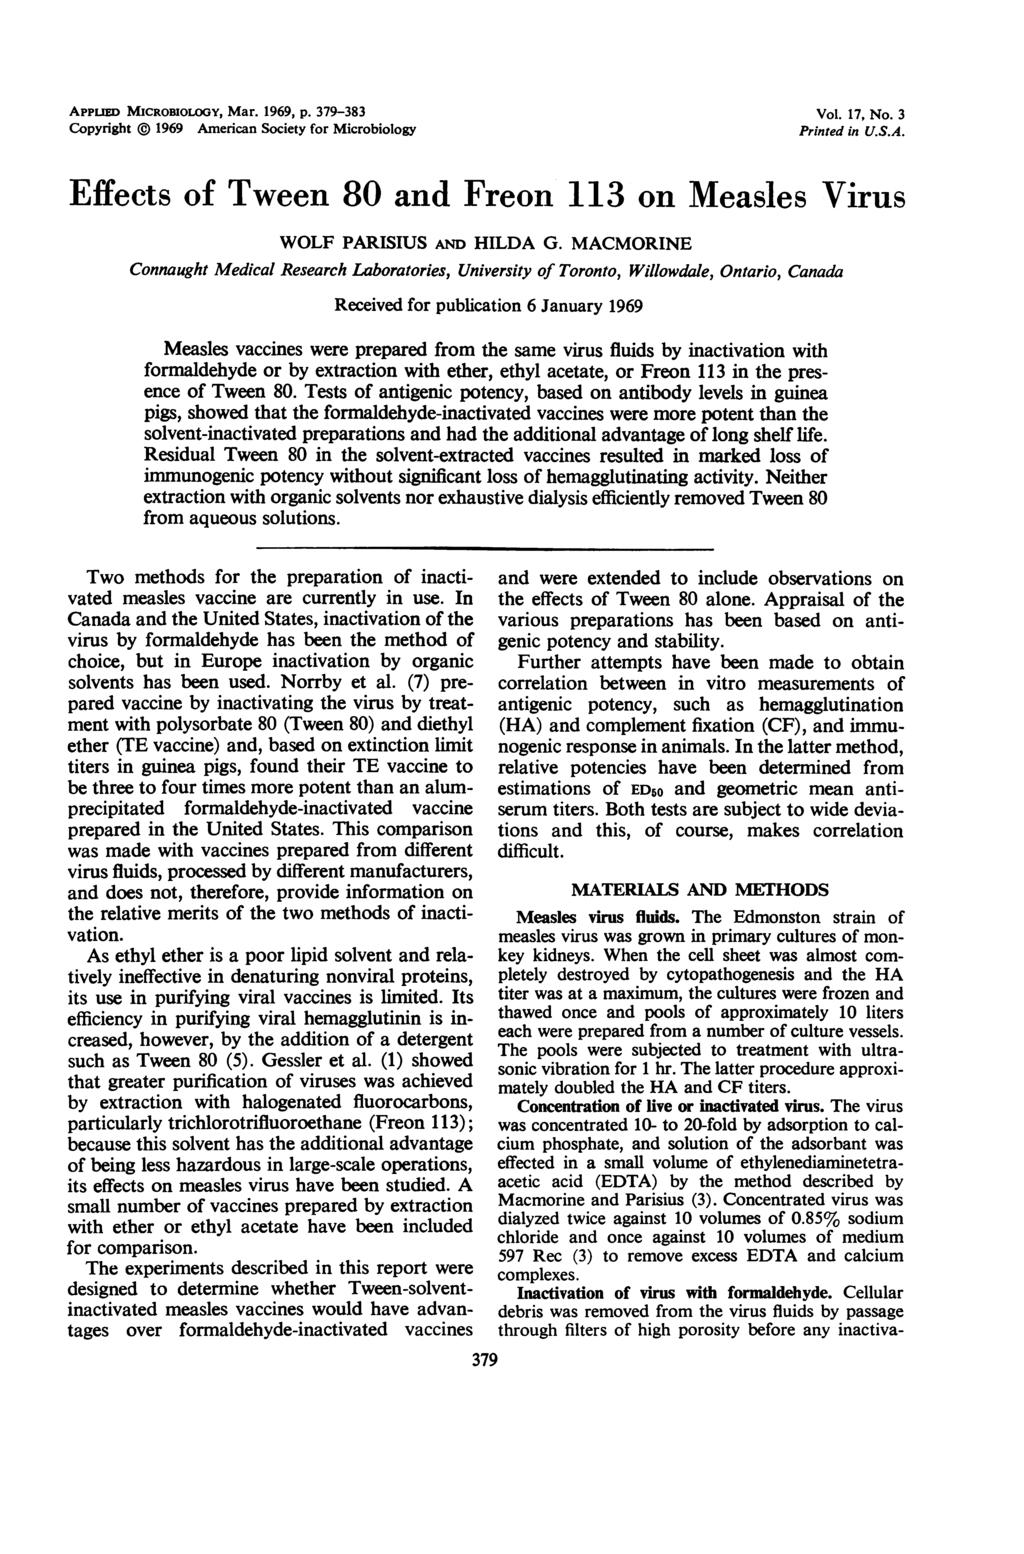 Appiua MICROBIOLOGY, Mar. 1969, p. 379-383 Copyright 1969 American Society for Microbiology Vol. 17, No. 3 Printed in U.S.A. Effects of Tween 80 and Freon 113 on Measles Virus WOLF PARISIUS AND HILDA G.